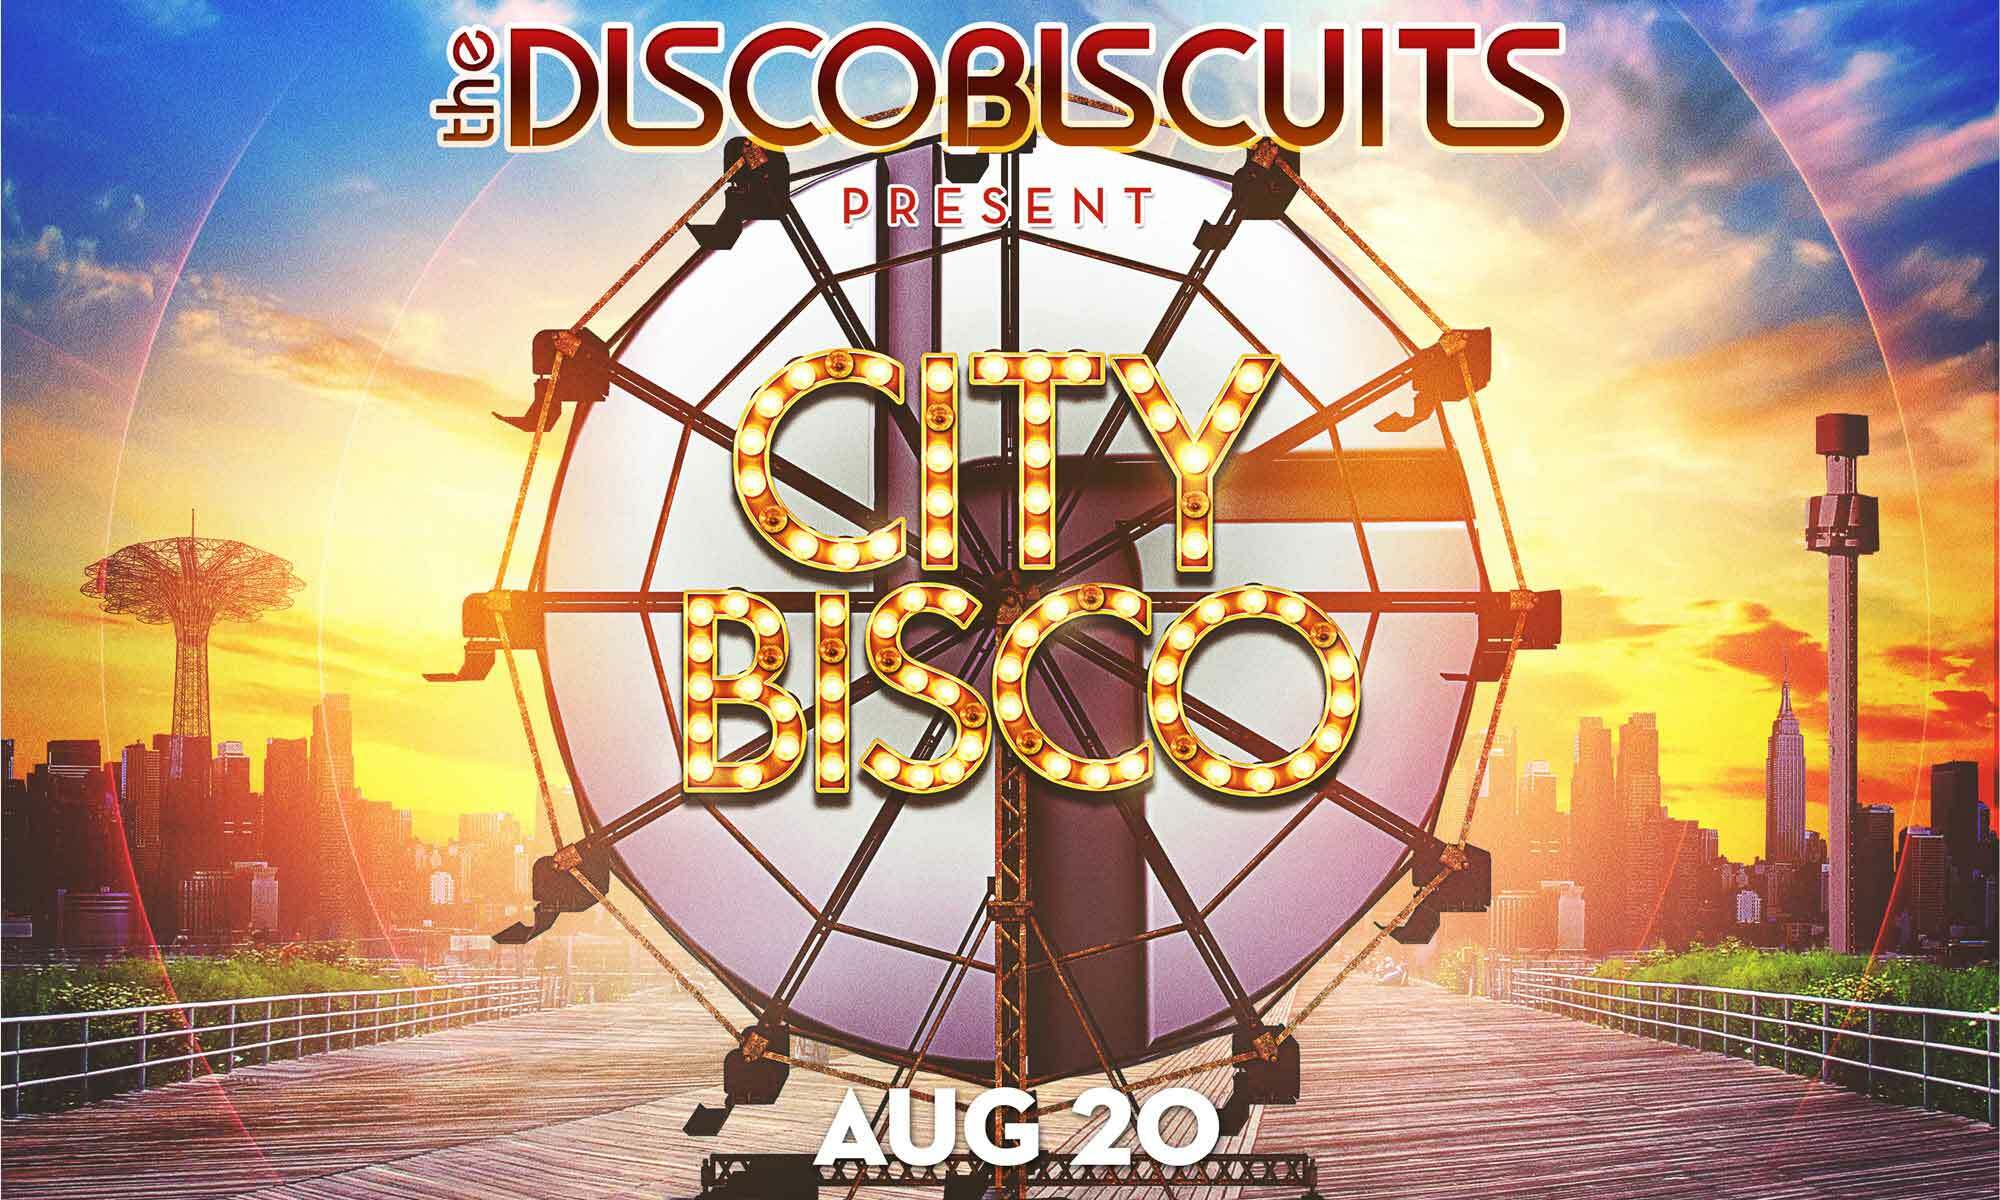 The Disco Biscuits Live Show